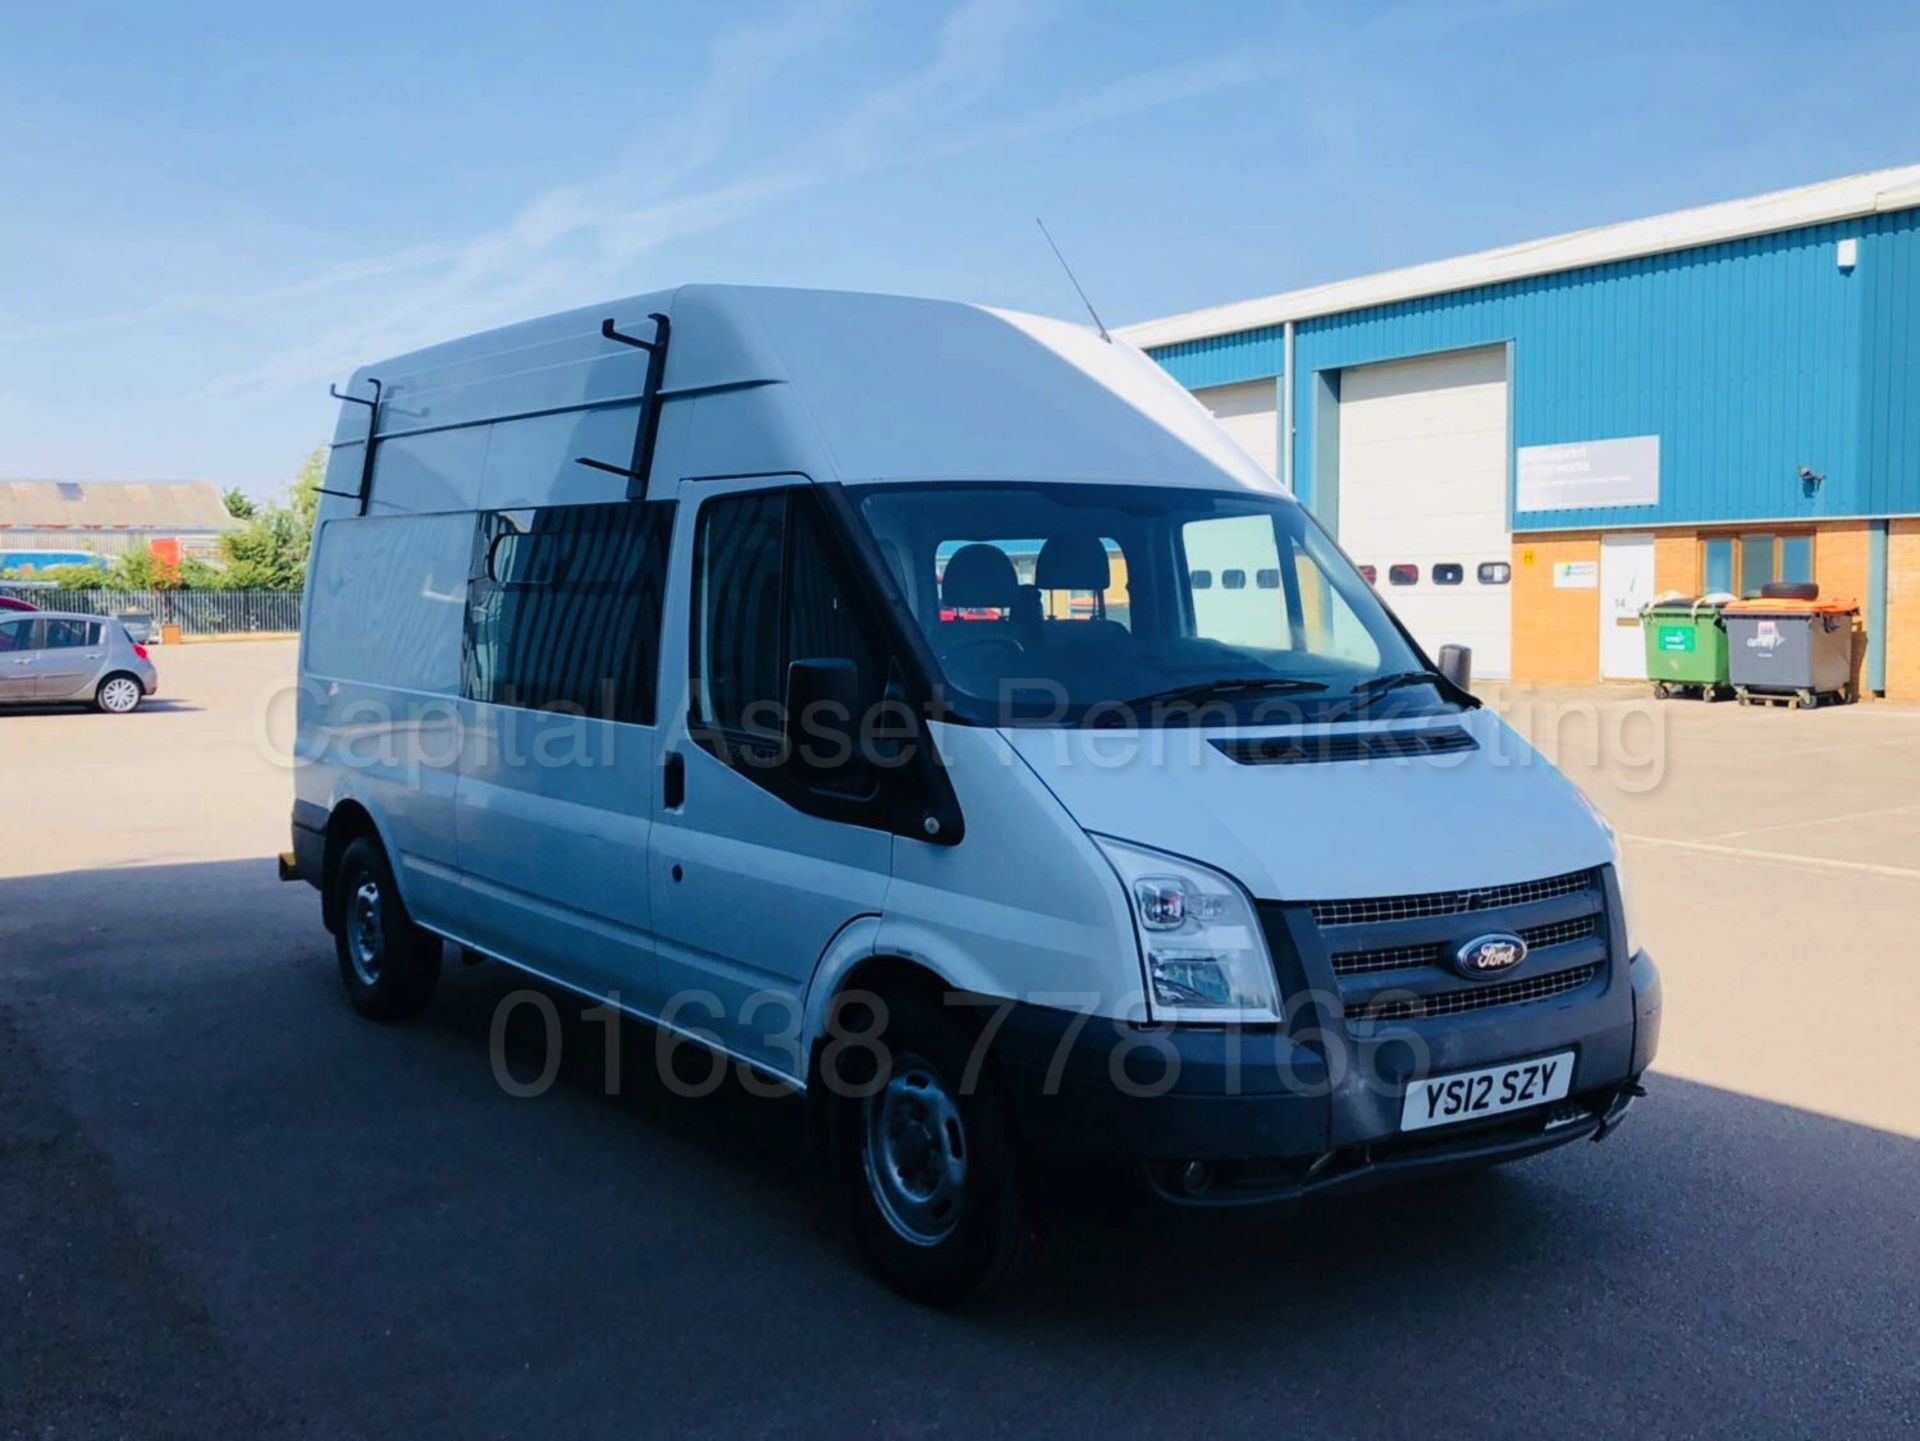 FORD TRANSIT T350L *LWB HI-ROOF / MESSING UNIT* (2012) '2.4 TDCI - 6 SPEED' *CLARKS CONVERSION* - Image 11 of 24